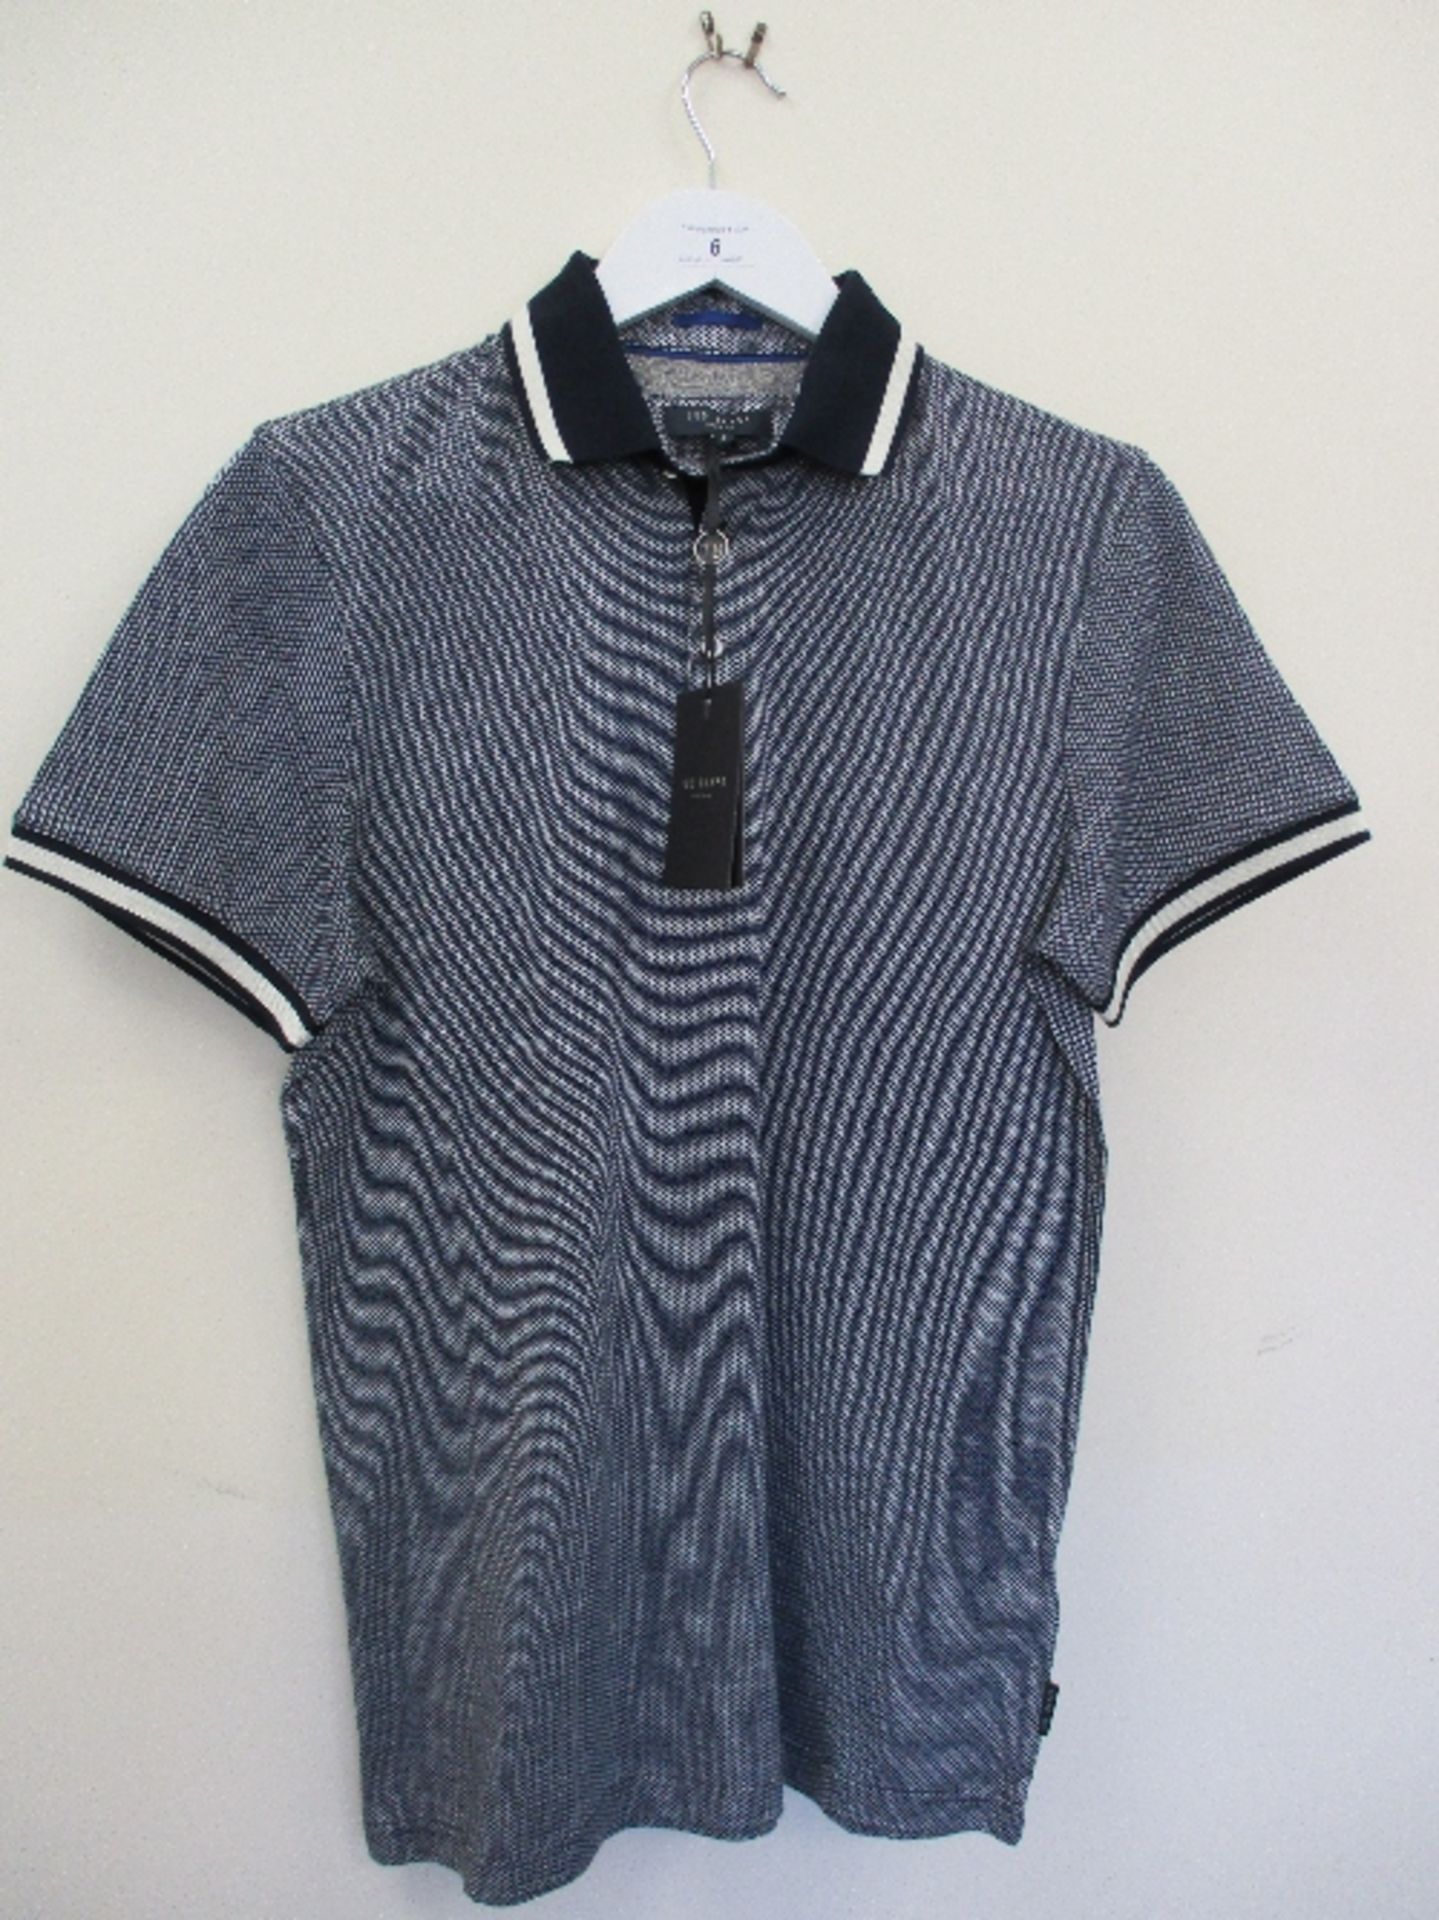 Ted Baker polo shirt - navy - small RRP £69